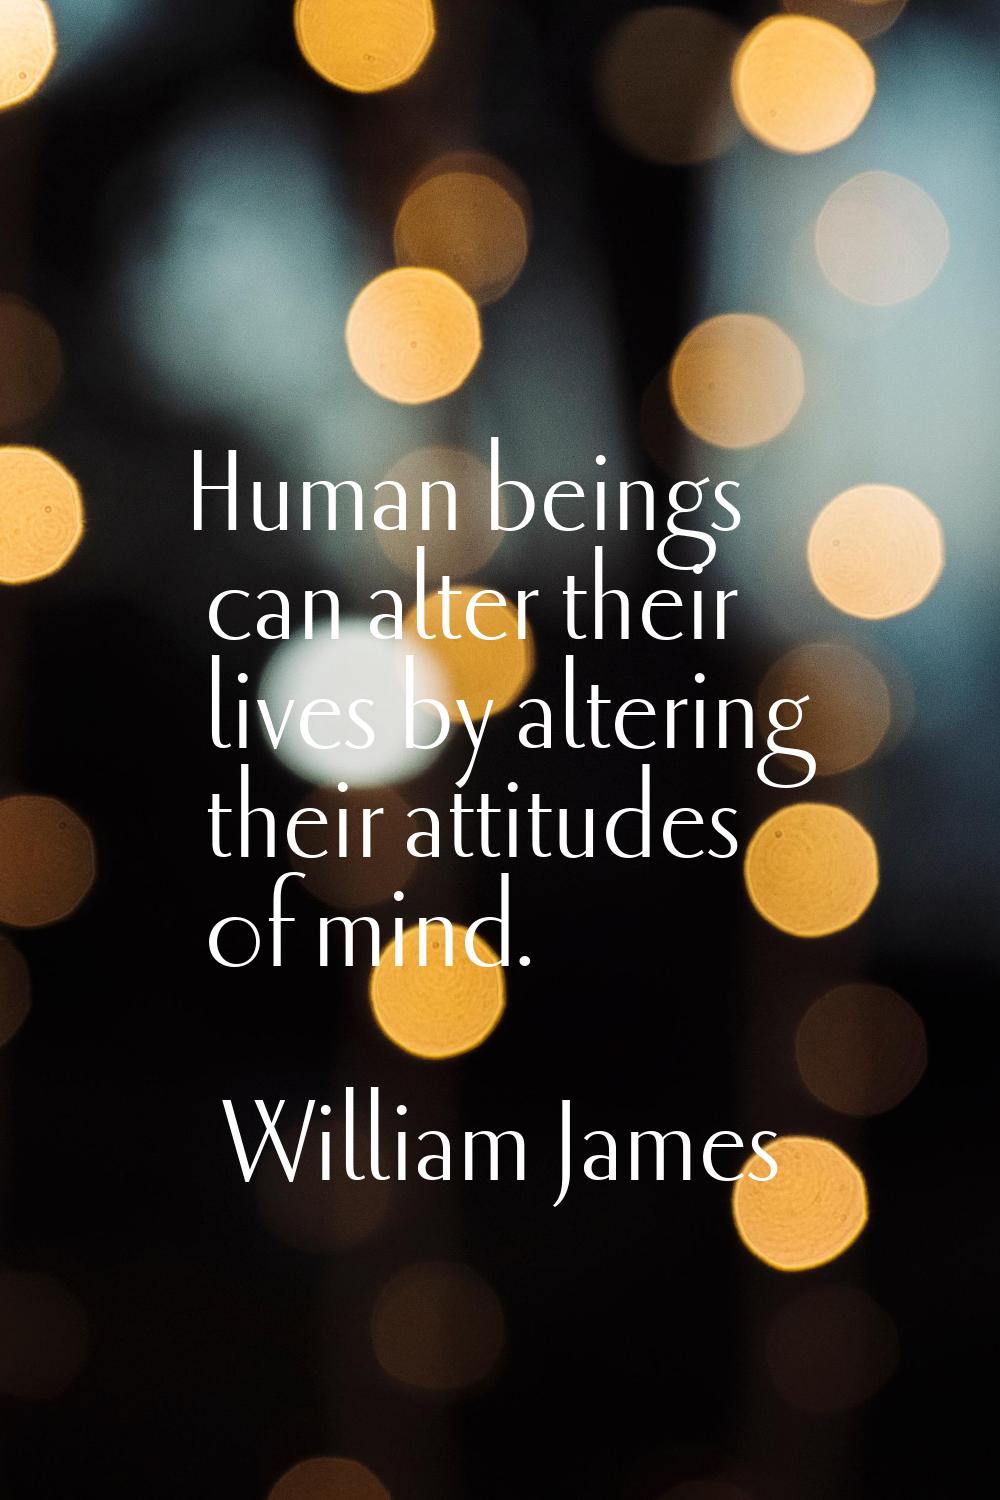 Human beings can alter their lives by altering their attitudes of mind.